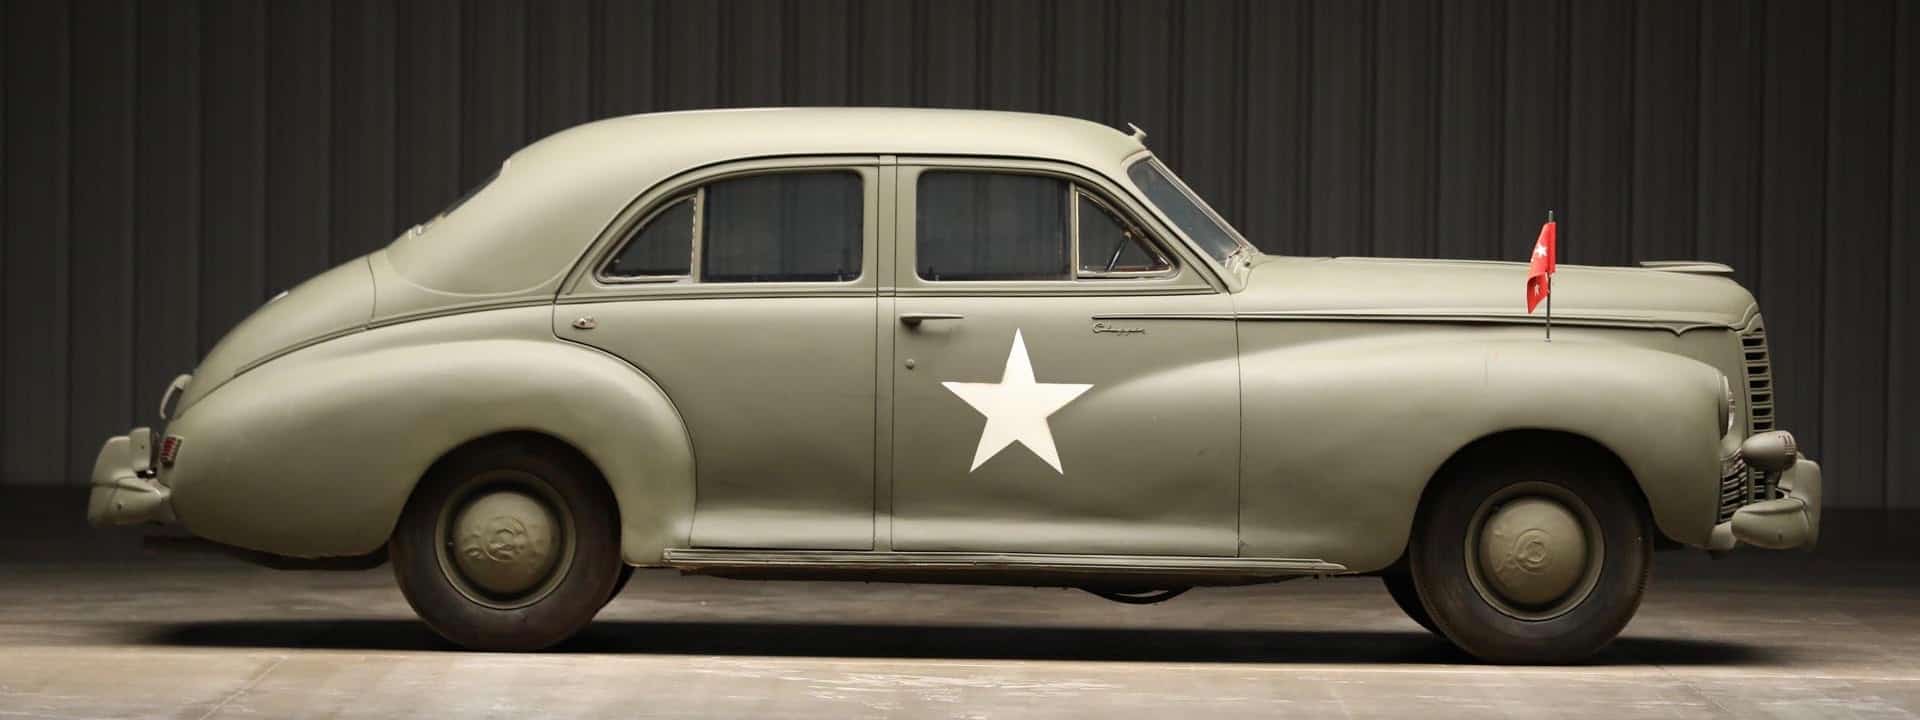 Patton command car, Patton command car on docket for WWII collector auction, ClassicCars.com Journal